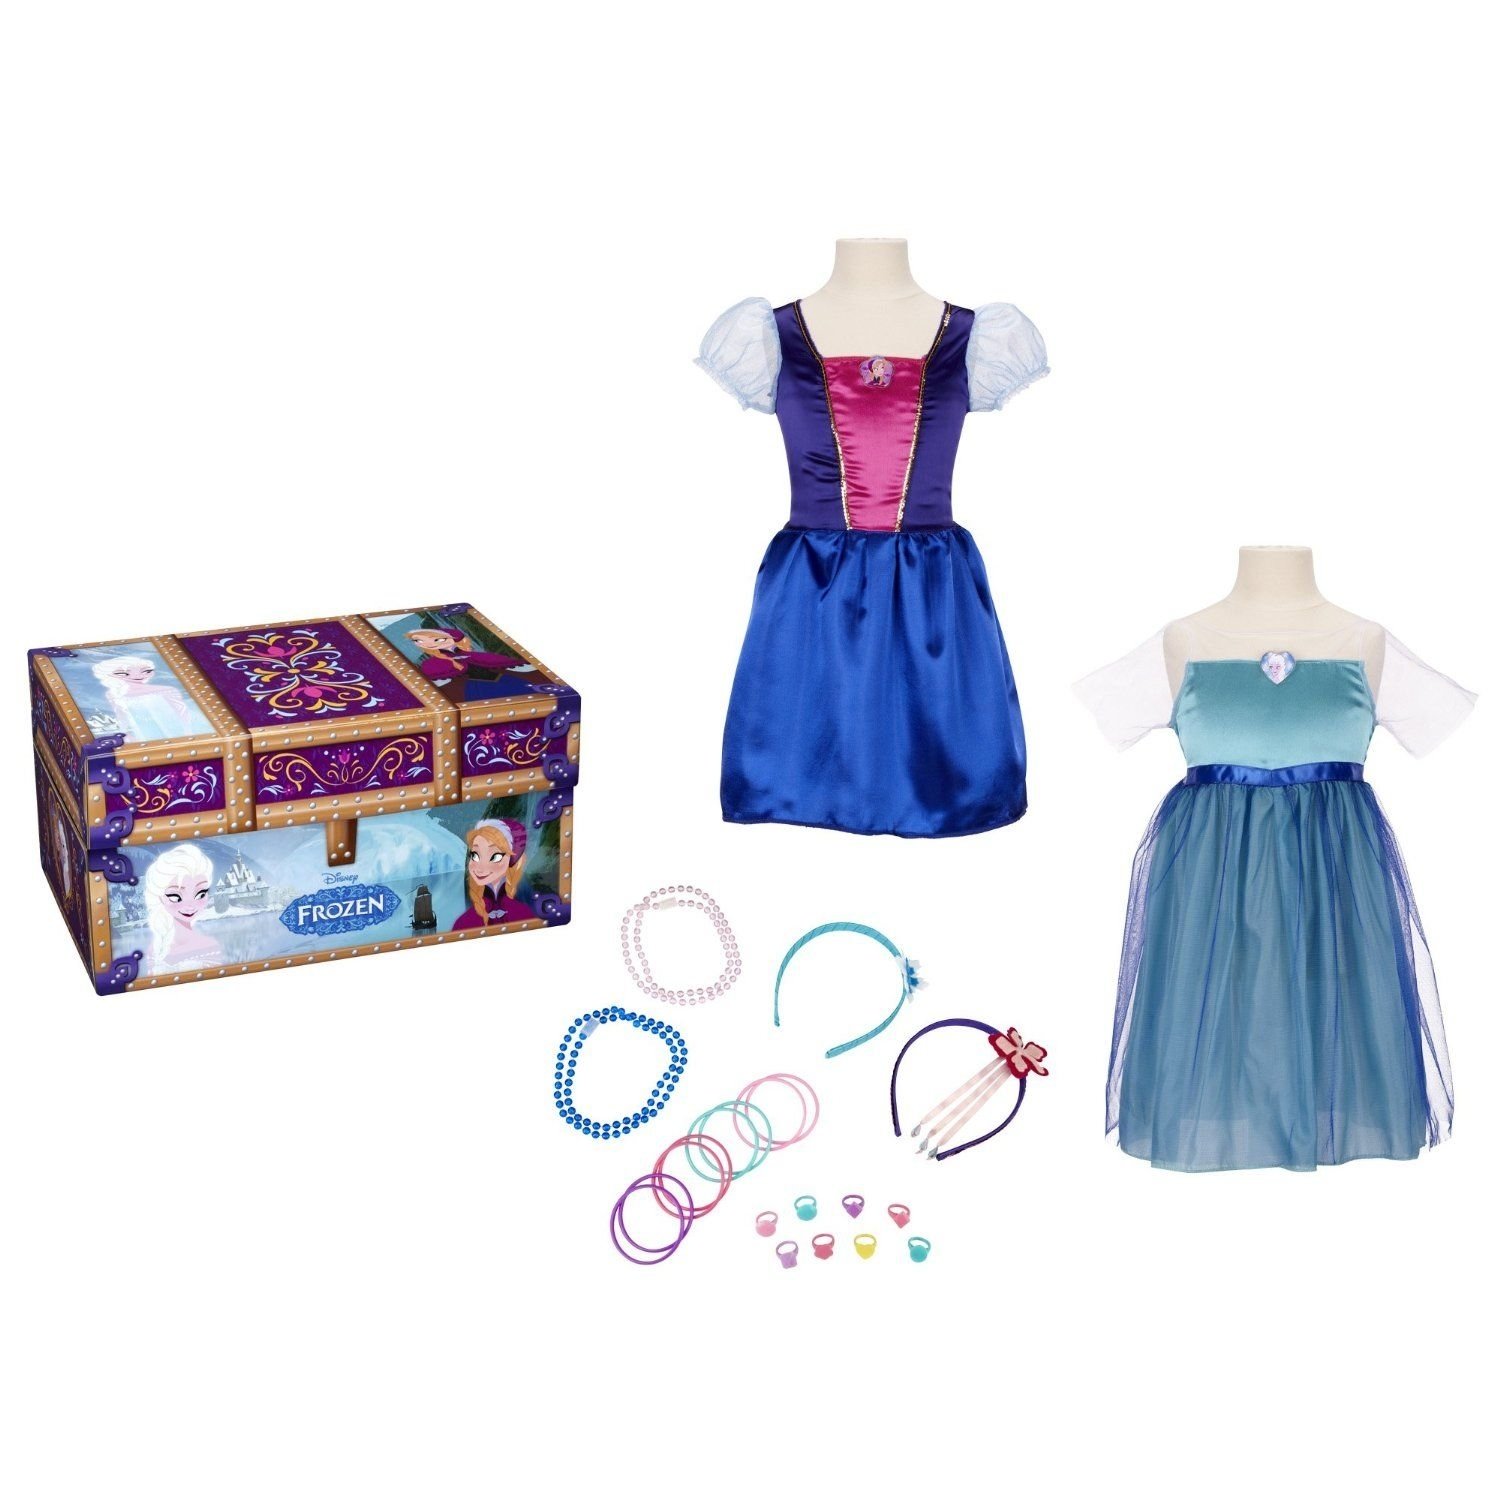 10 Most Recommended Gift Ideas For A 4 Year Old Girl best gifts for 4 year old girls in 2017 disney frozen and disney 1 2022